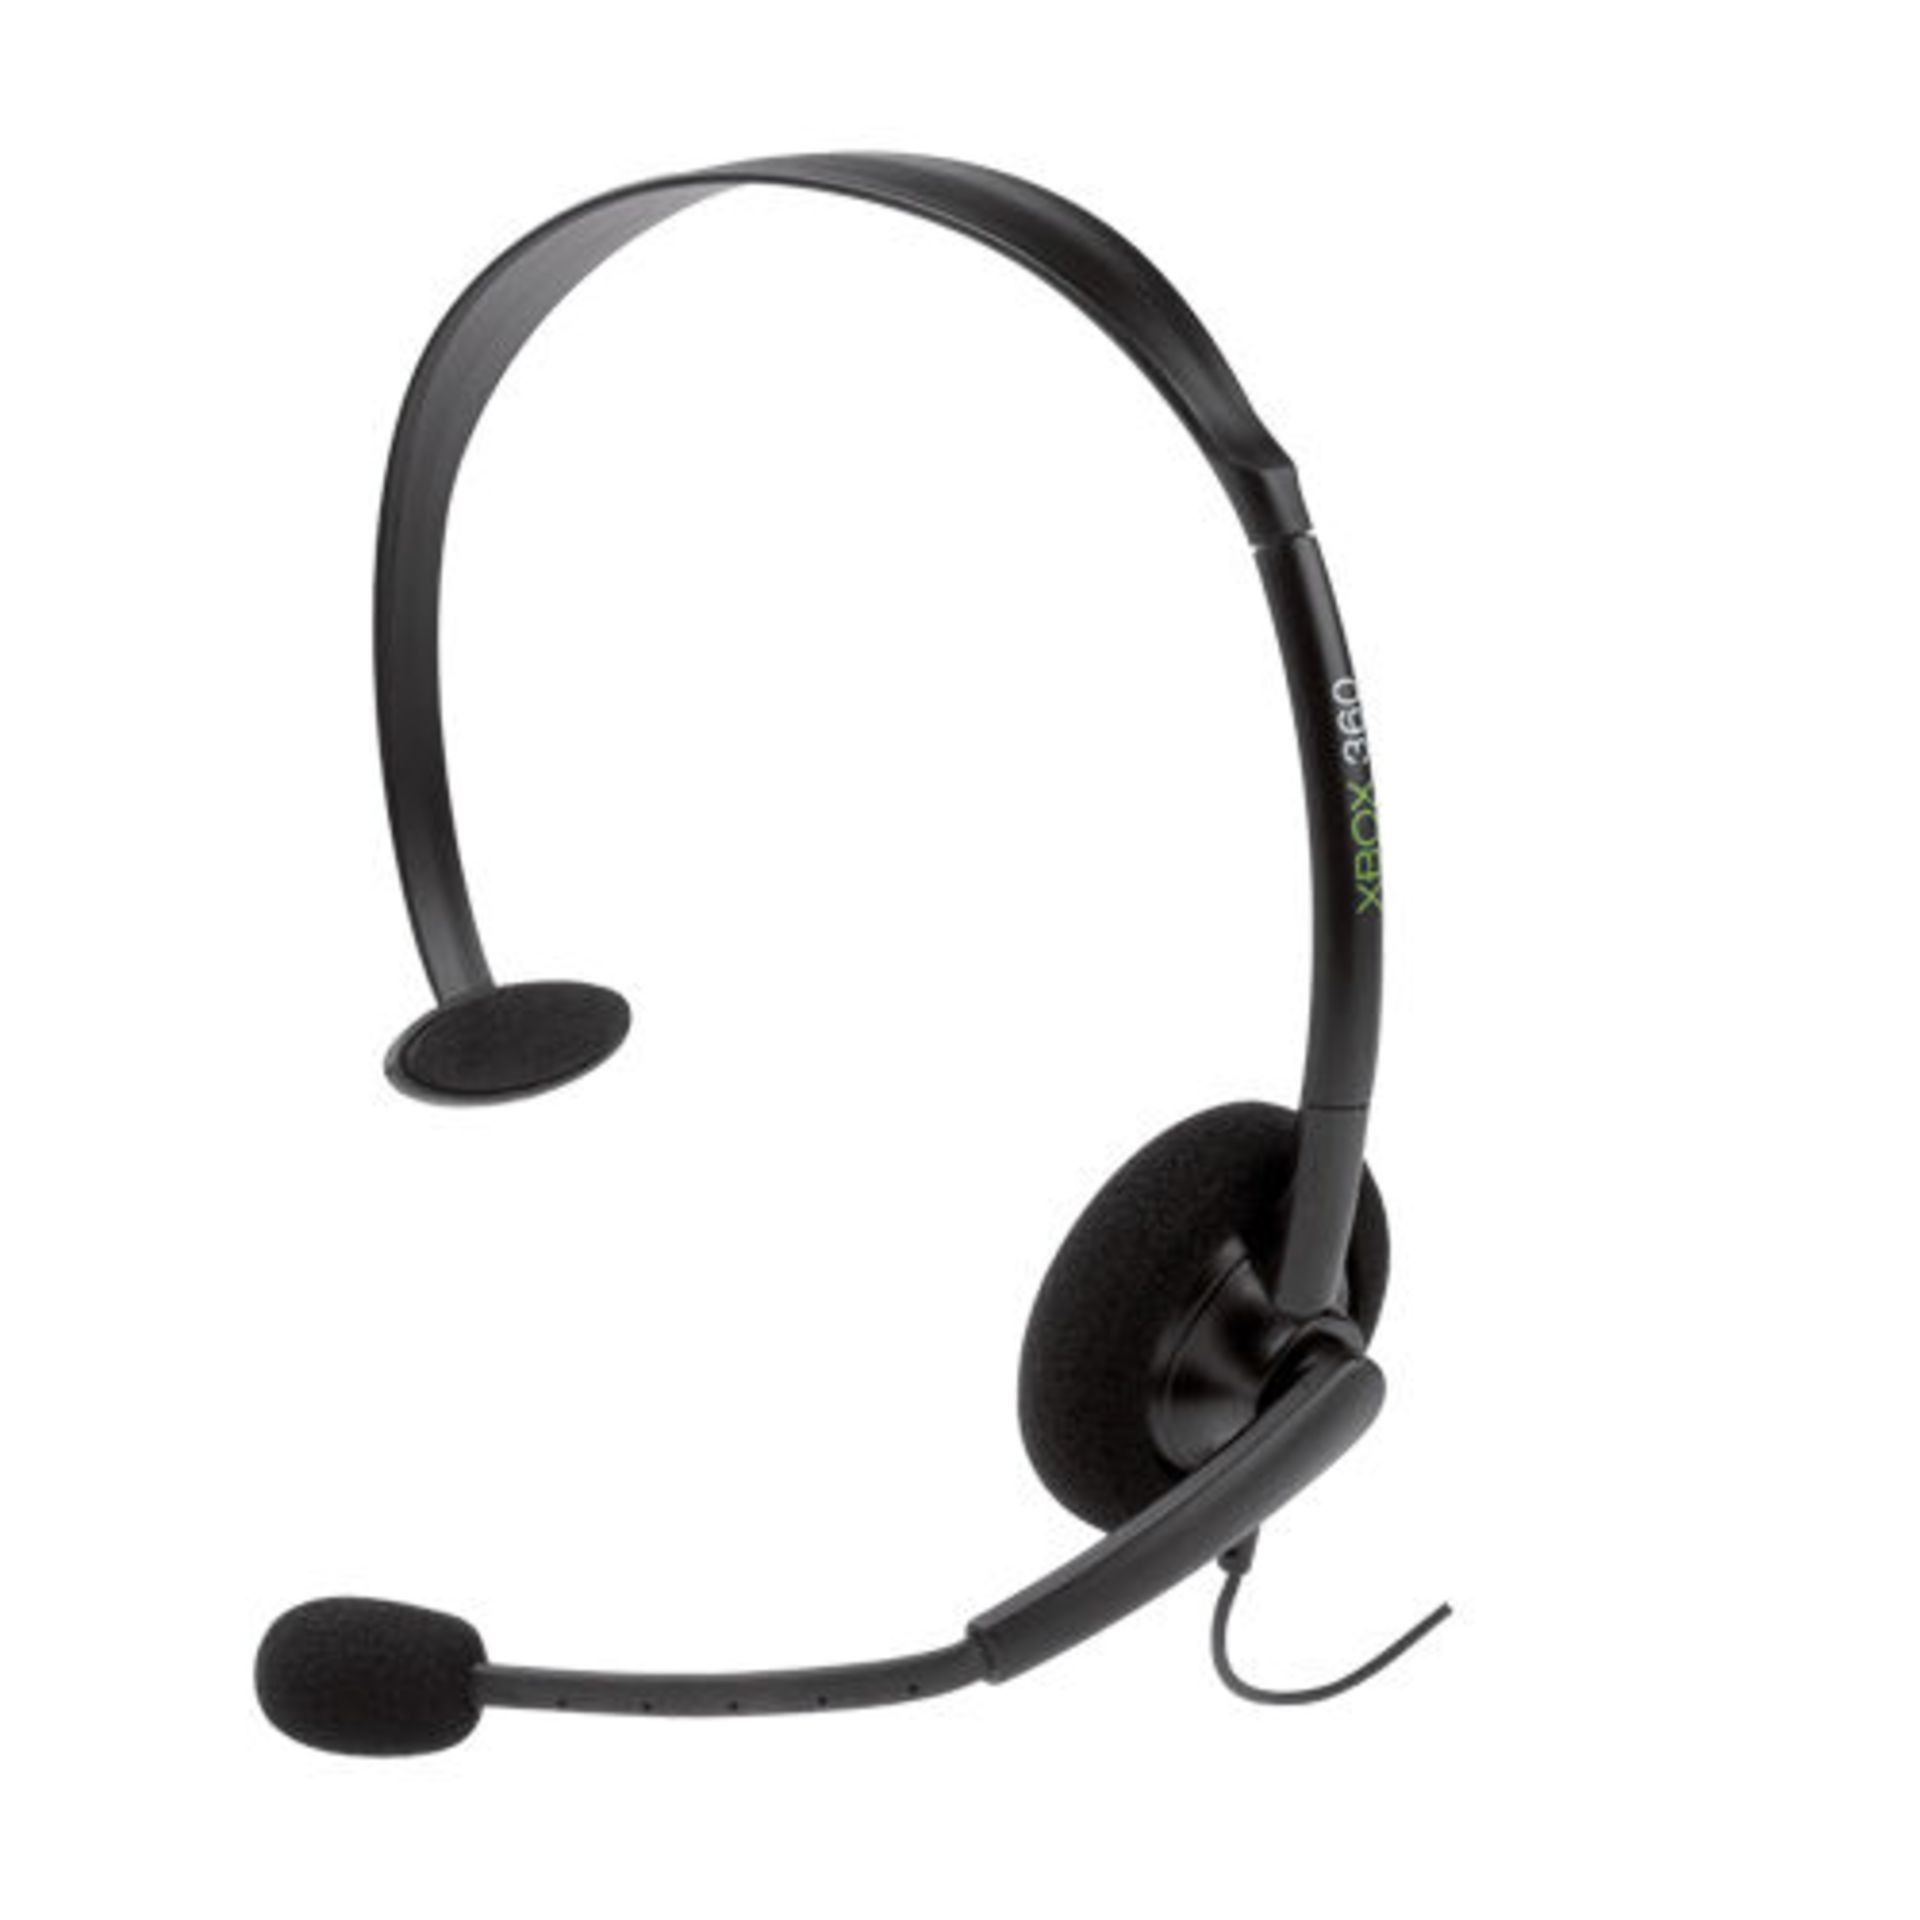 JOBLOT 100 X NEW OFFICIAL XBOX LIVE ONLINE CHAT HEADSET WITH MIC GAMING HEADPHONES 2.5MM AUX - Image 7 of 7